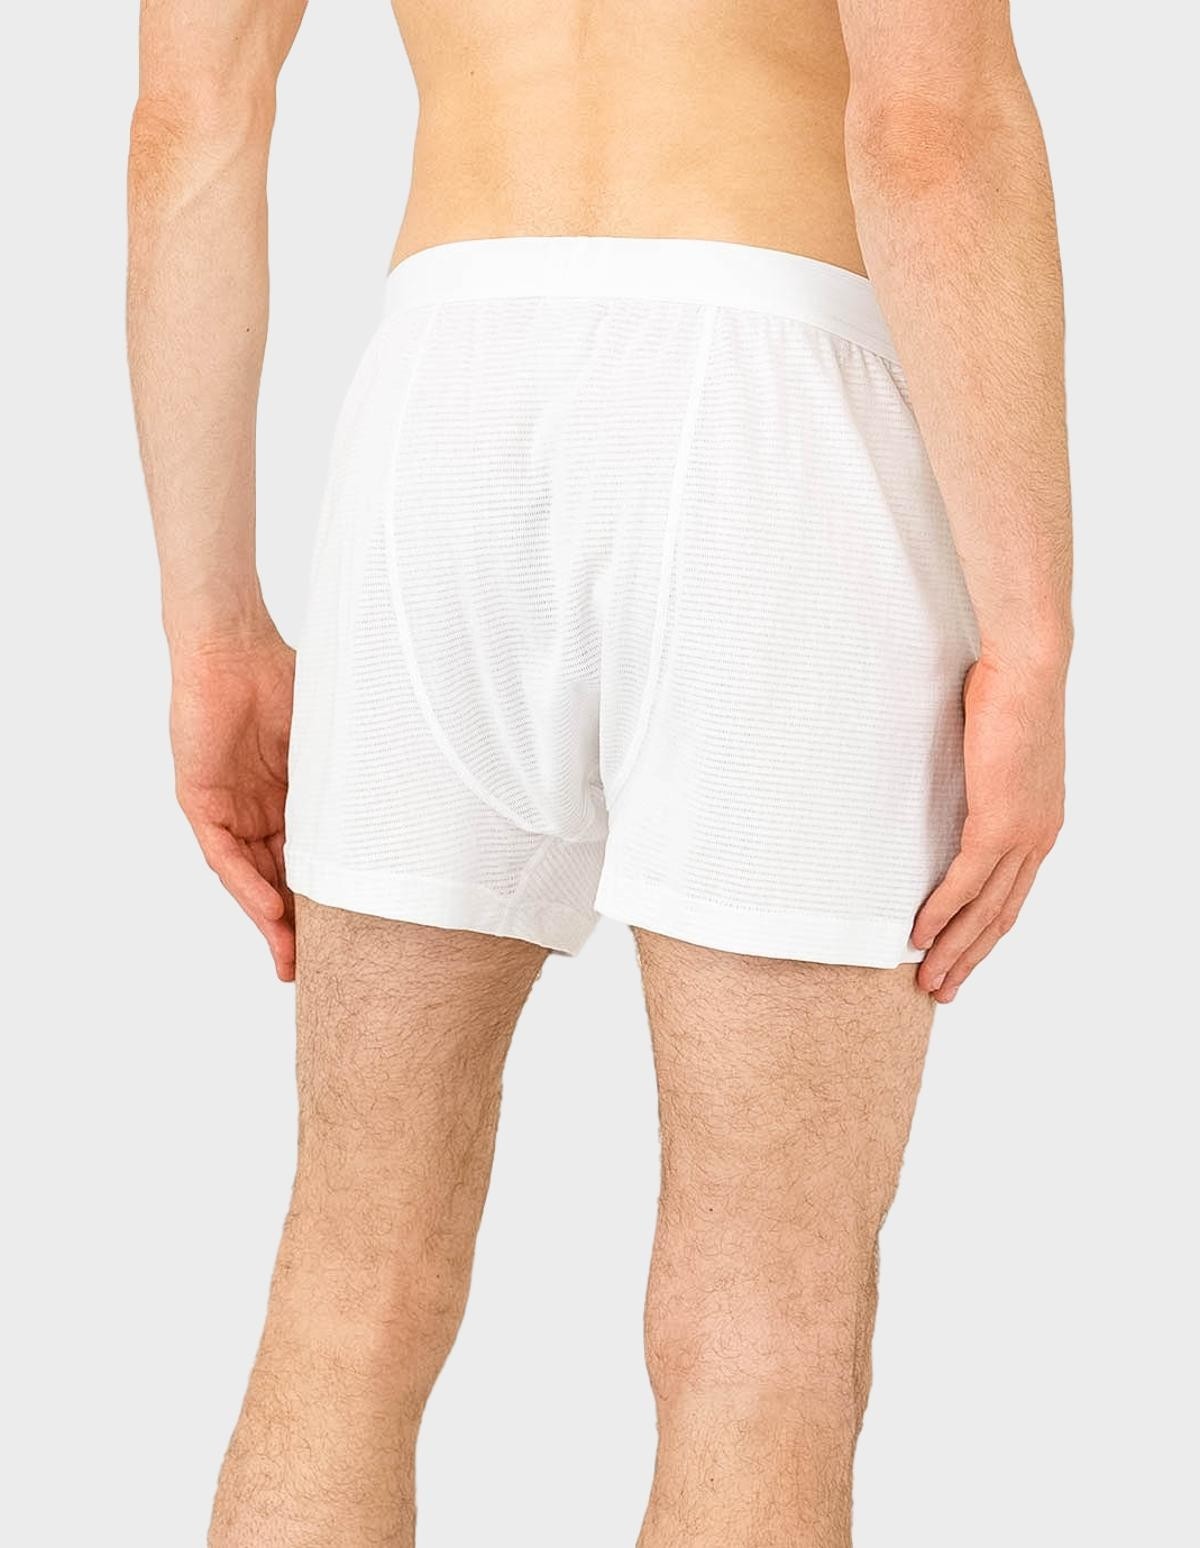 Sunspel 1 Button Short Boxers in White